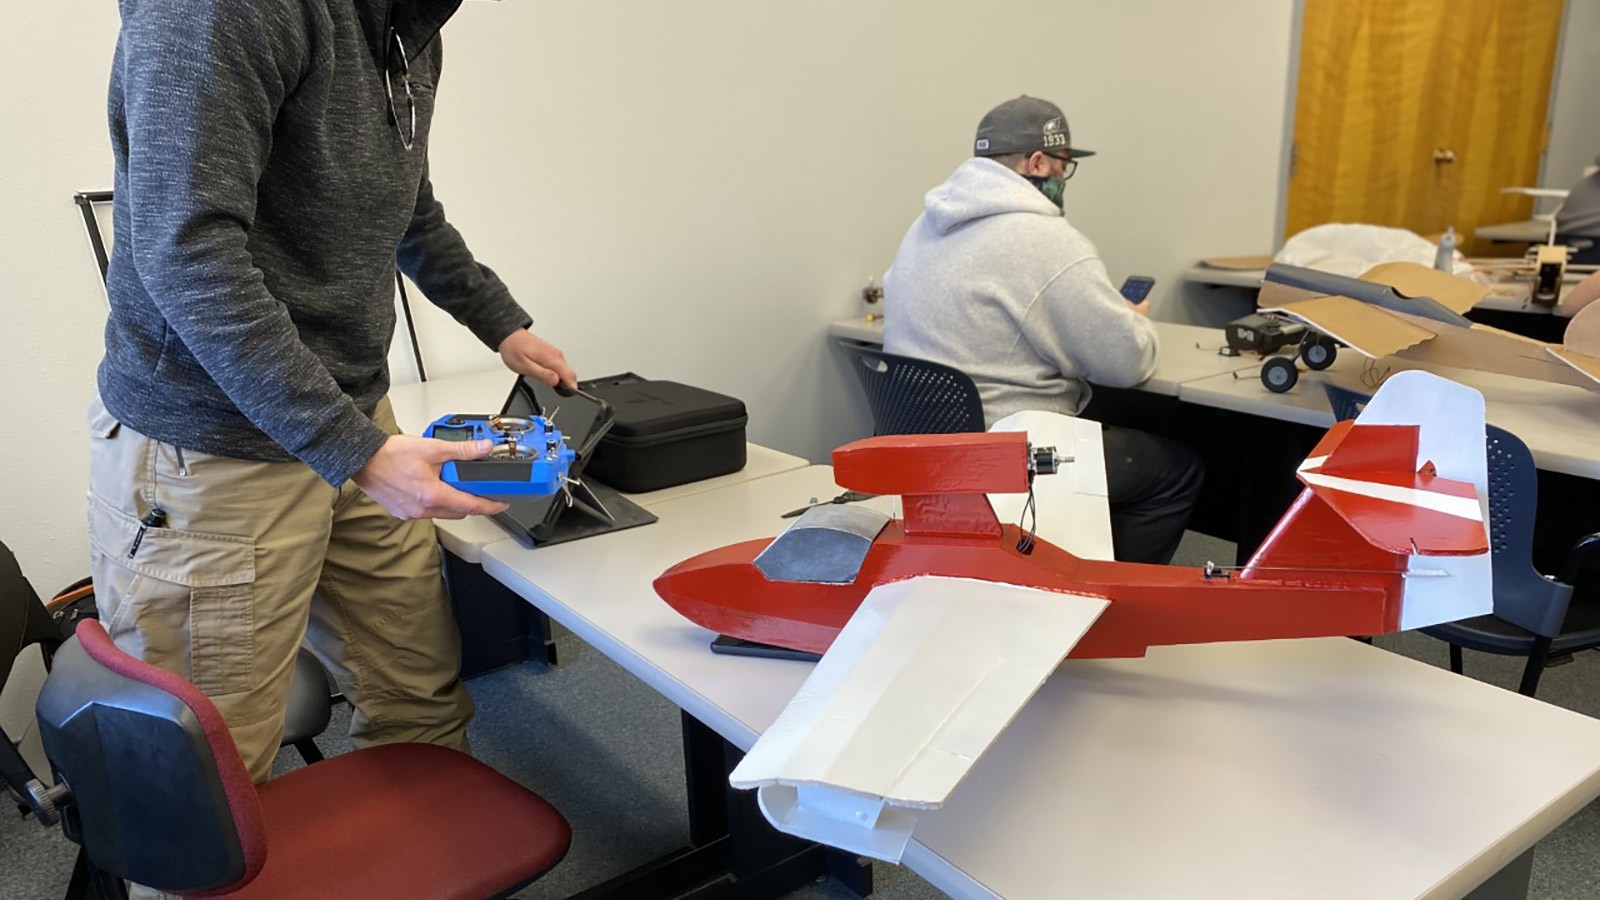 USU students working on a model airplane with a built-in camera.